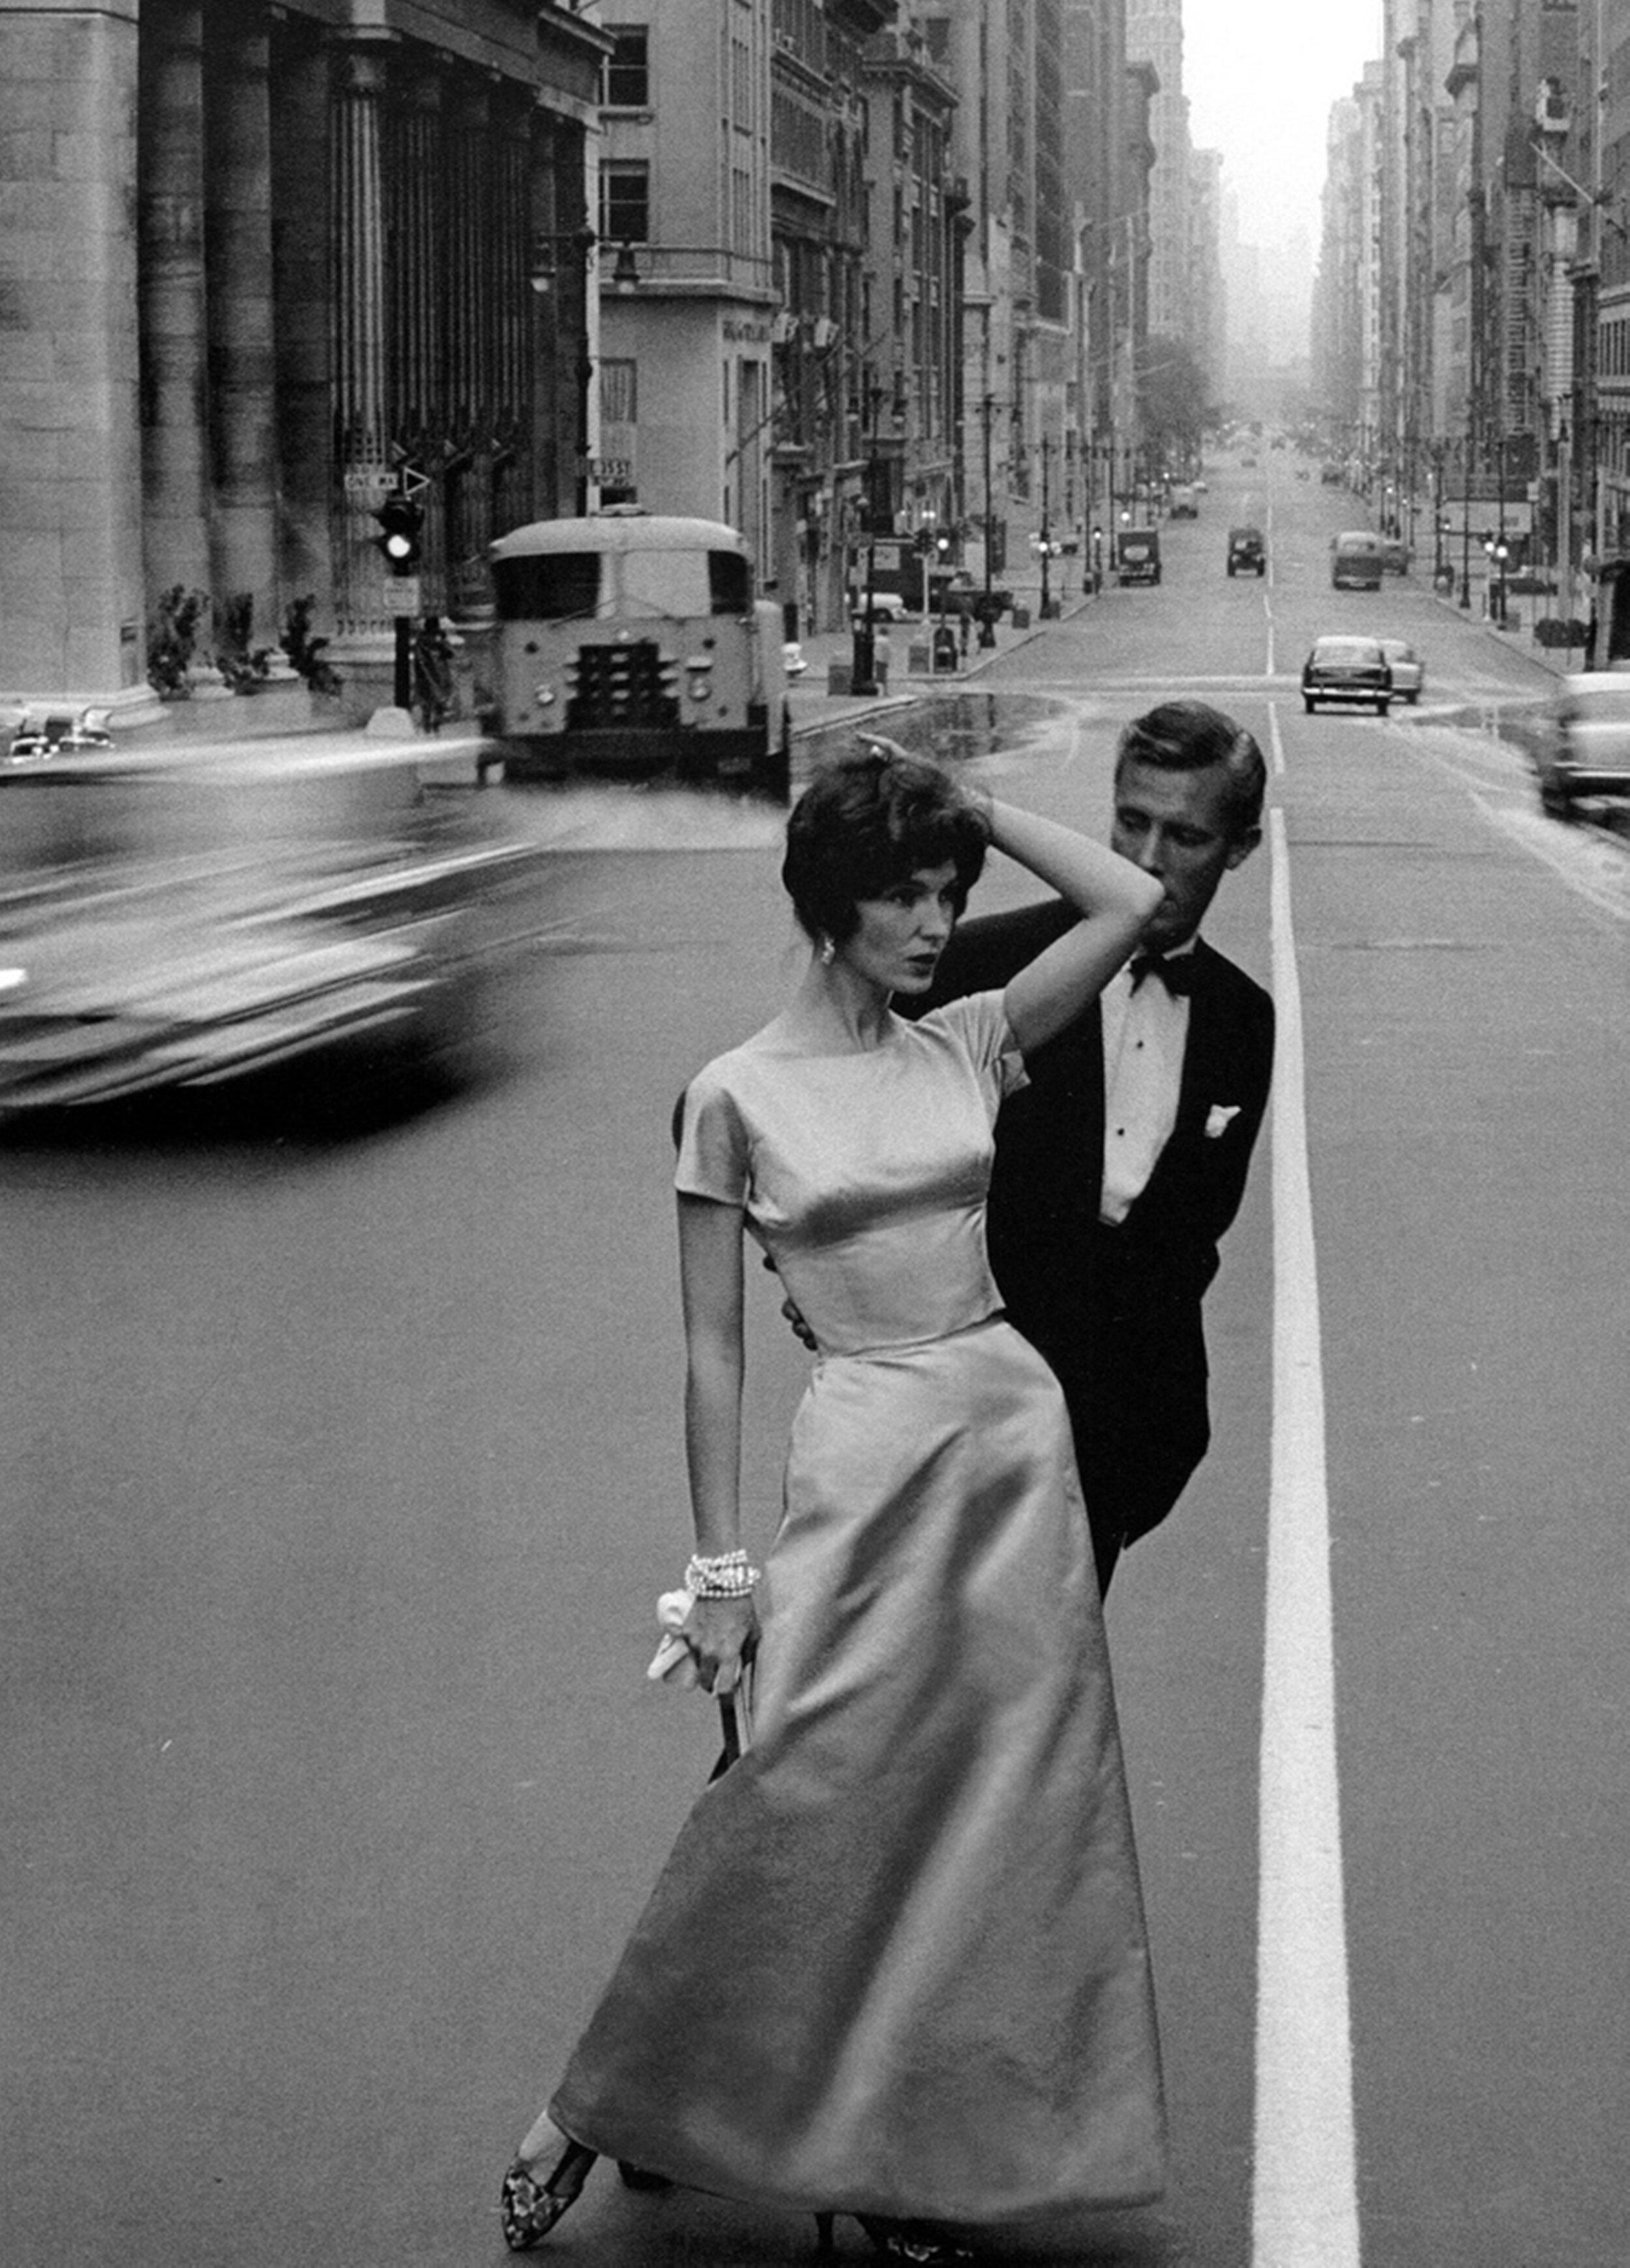 Joanna McCormick and Colin Fox photographed by Jerry Schatzberg in New York, 1958.